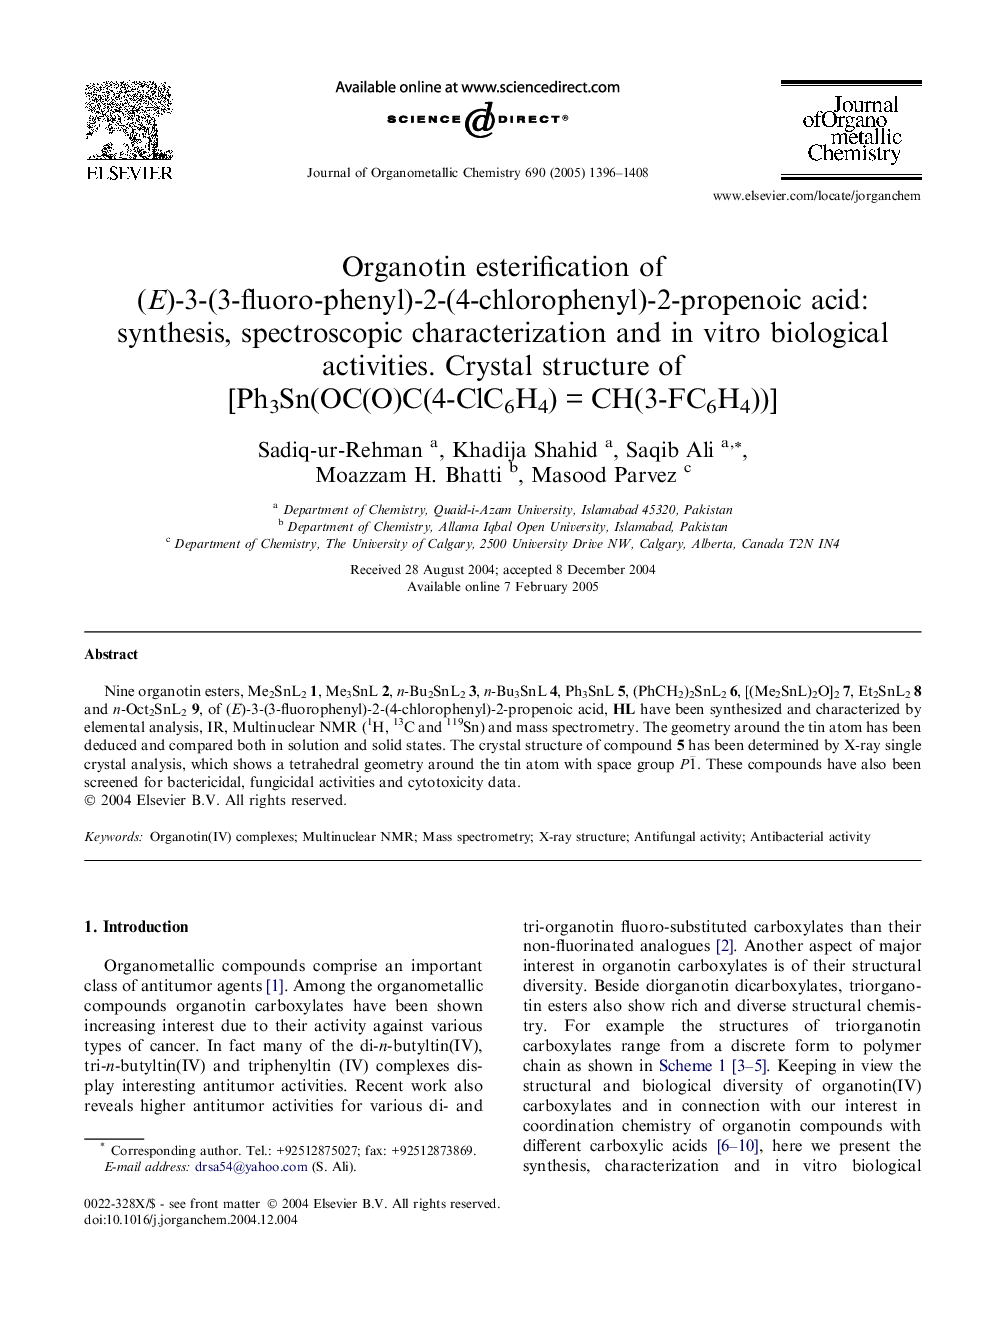 Organotin esterification of (E)-3-(3-fluoro-phenyl)-2-(4-chlorophenyl)-2-propenoic acid: synthesis, spectroscopic characterization and in vitro biological activities. Crystal structure of [Ph3Sn(OC(O)C(4-ClC6H4)Â =Â CH(3-FC6H4))]